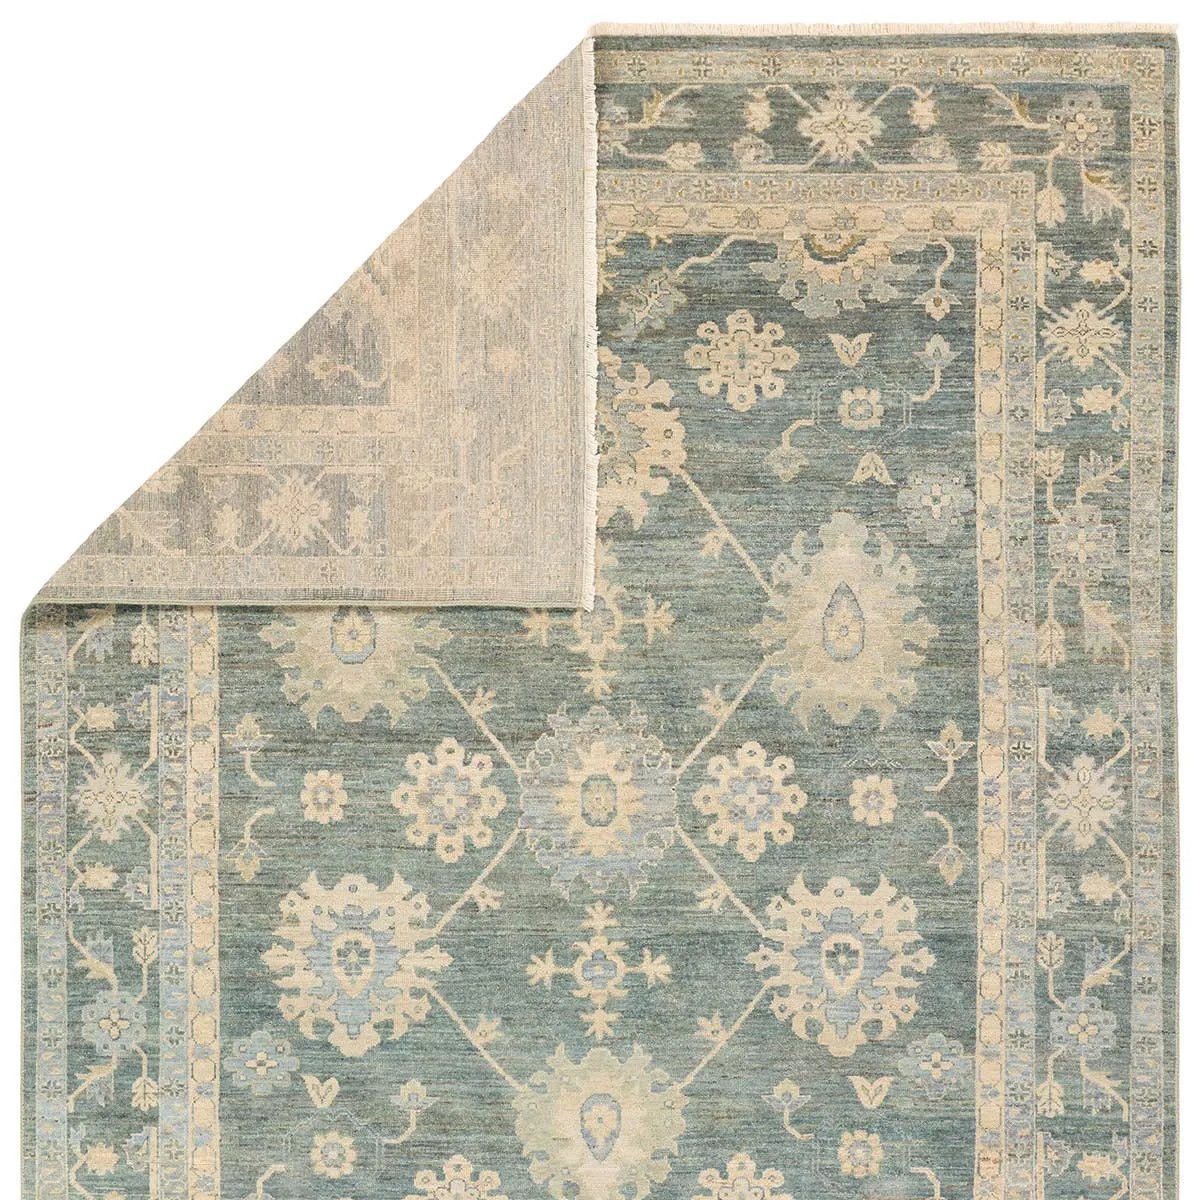 The Orenda Kerensa features heirloom-quality designs of muted and uniquely updated Old World patterns. The Kerensa area rug boasts a beautifully washed medallion motif with an antique Oushak-inspired vibe. The cream tone is accented with cool blues, greens, and warm beige hues for added depth and intrigue. Amethyst Home provides interior design, new home construction design consulting, vintage area rugs, and lighting in the Nashville metro area.